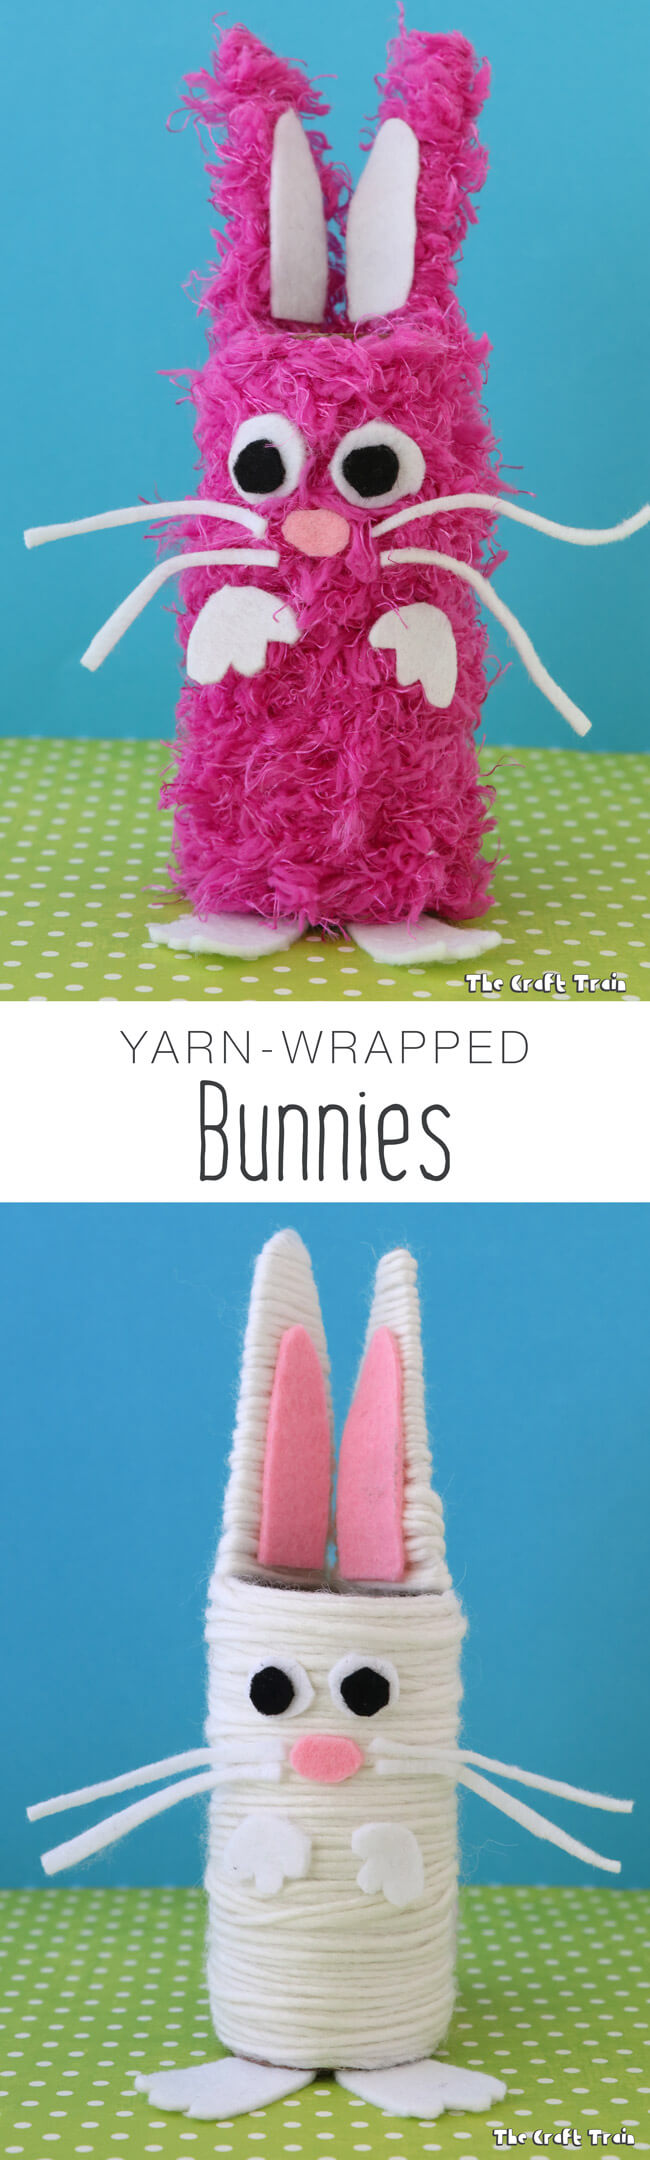 Create some cute yarn-wrapped bunnies using cardboard tubes for Easter